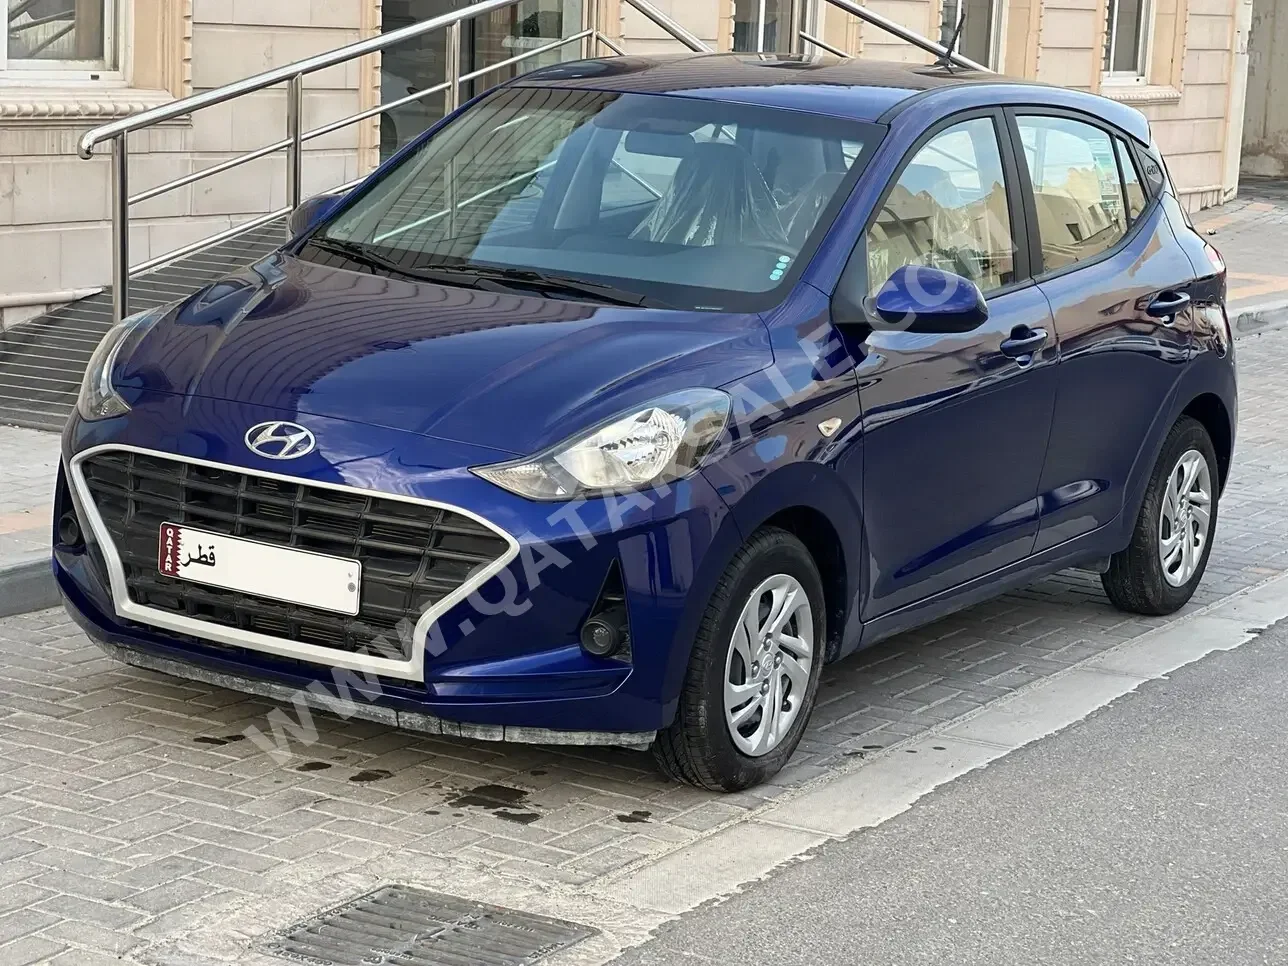  Hyundai  I  10  2023  Automatic  0 Km  4 Cylinder  Front Wheel Drive (FWD)  Hatchback  Blue  With Warranty